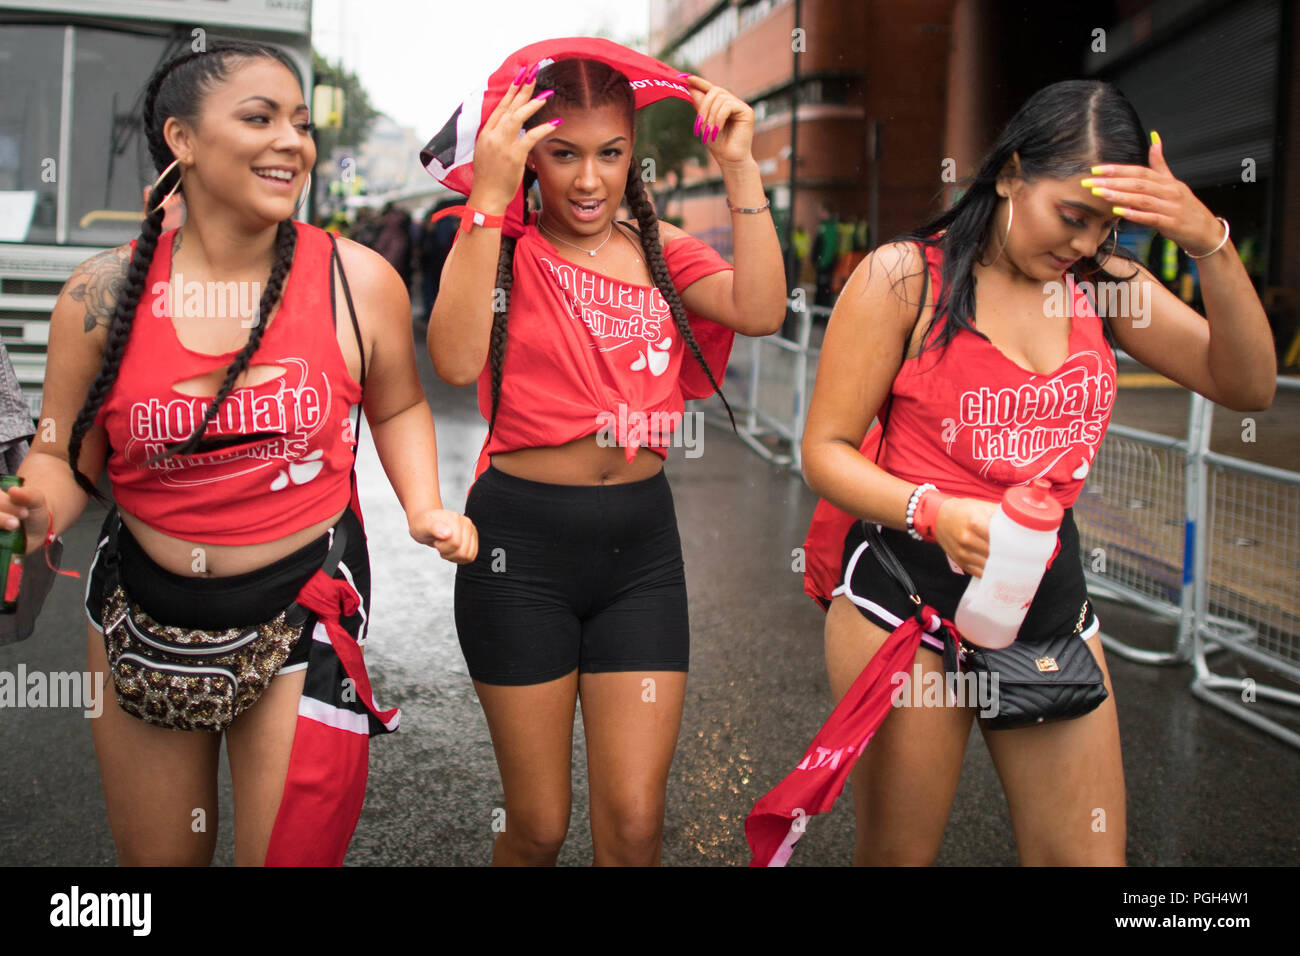 Participants in this year's Notting Hill Carnival brave heavy rain during Family Day. Stock Photo